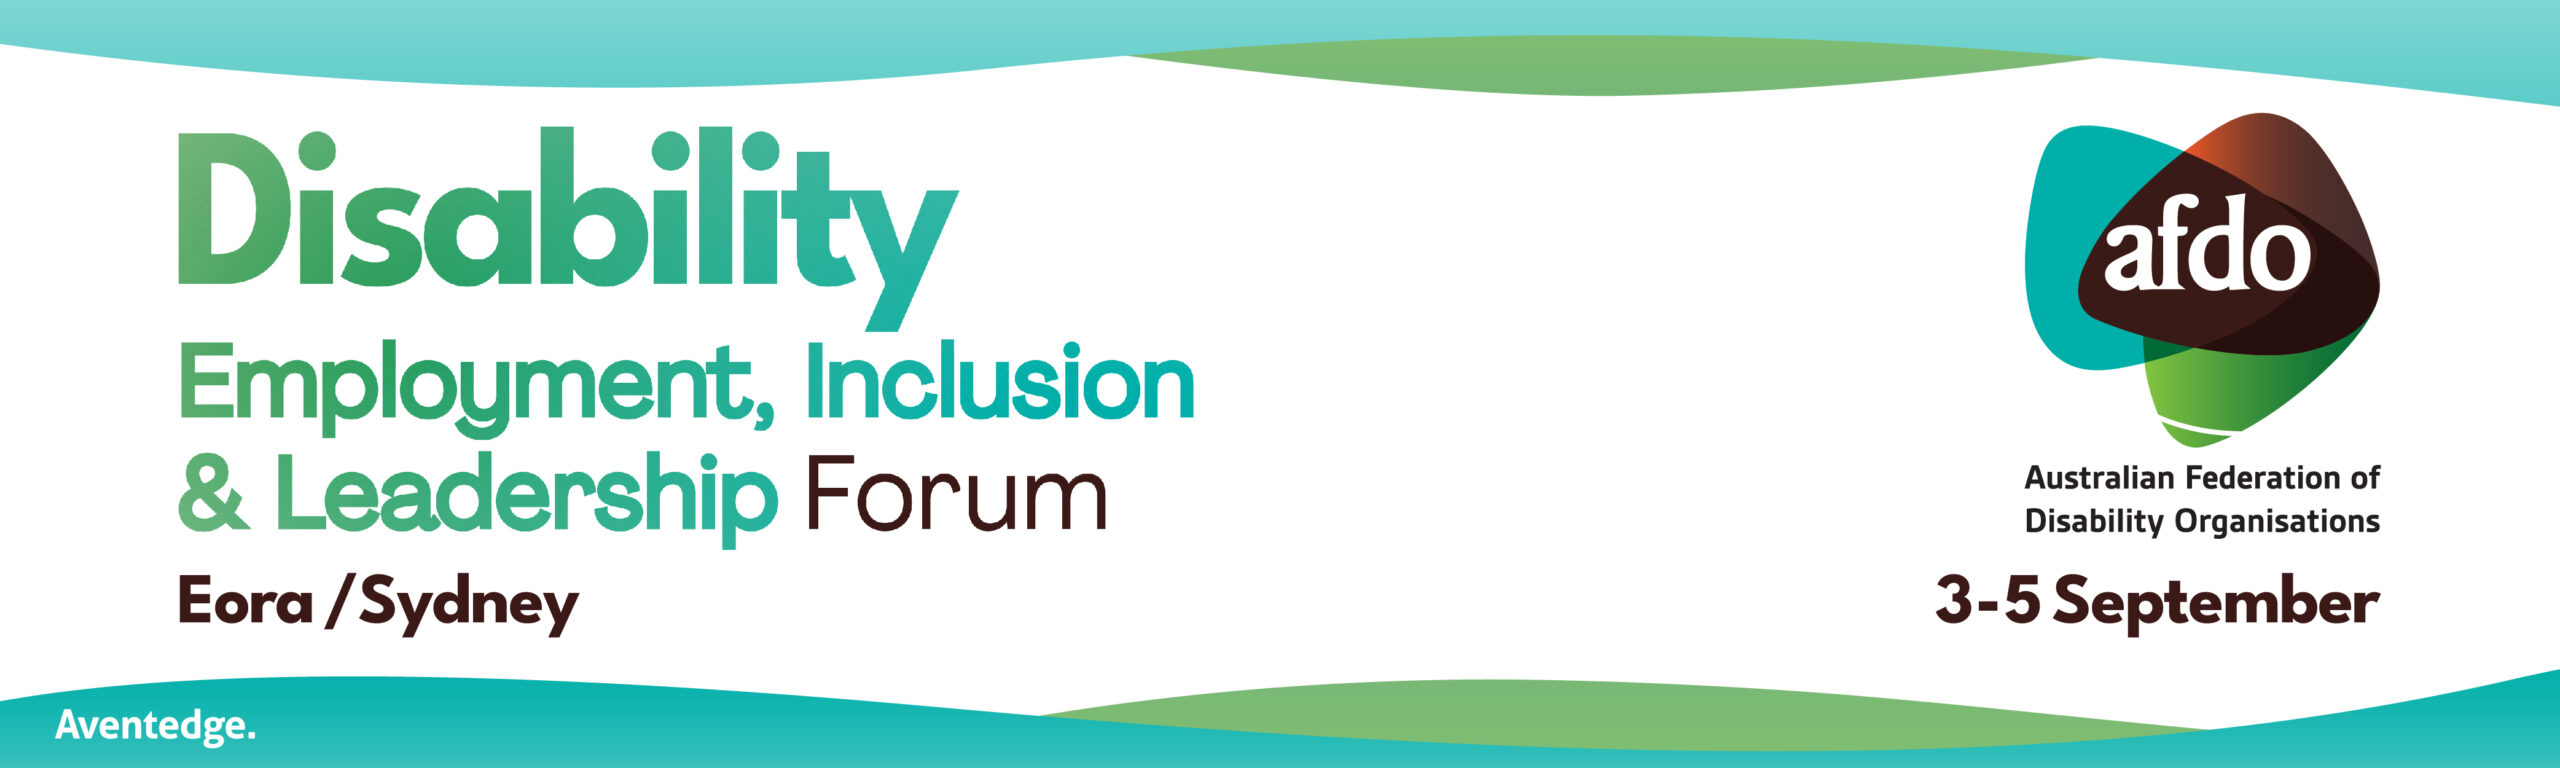 Disability Employment, Inclusion and Leadership Forum. Eora/Sydney, 3-5 September.